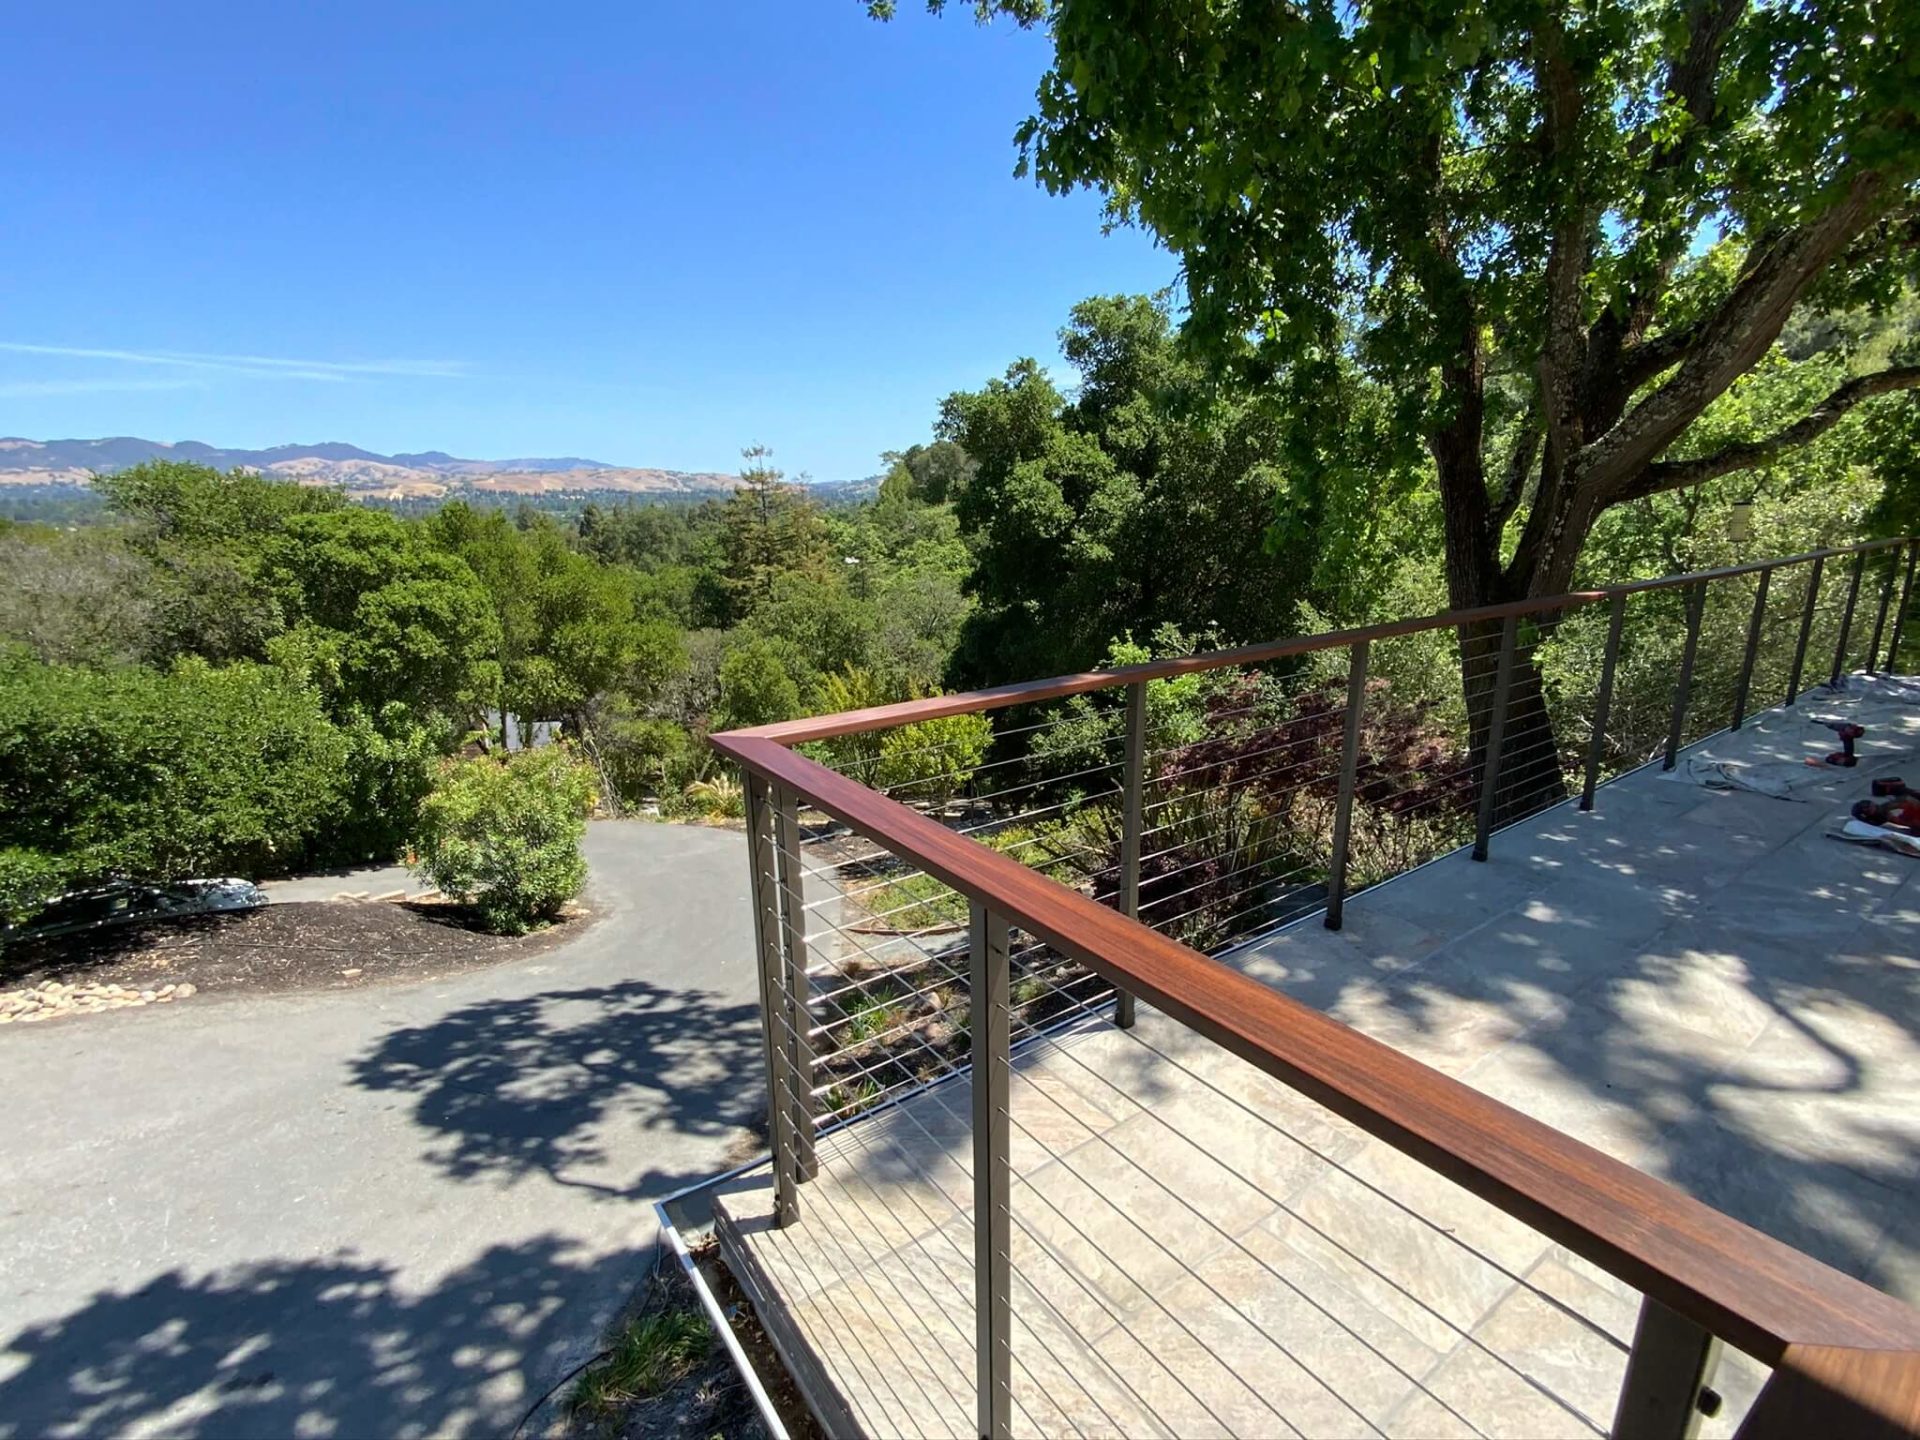 railing with wooden handrail and view of hills